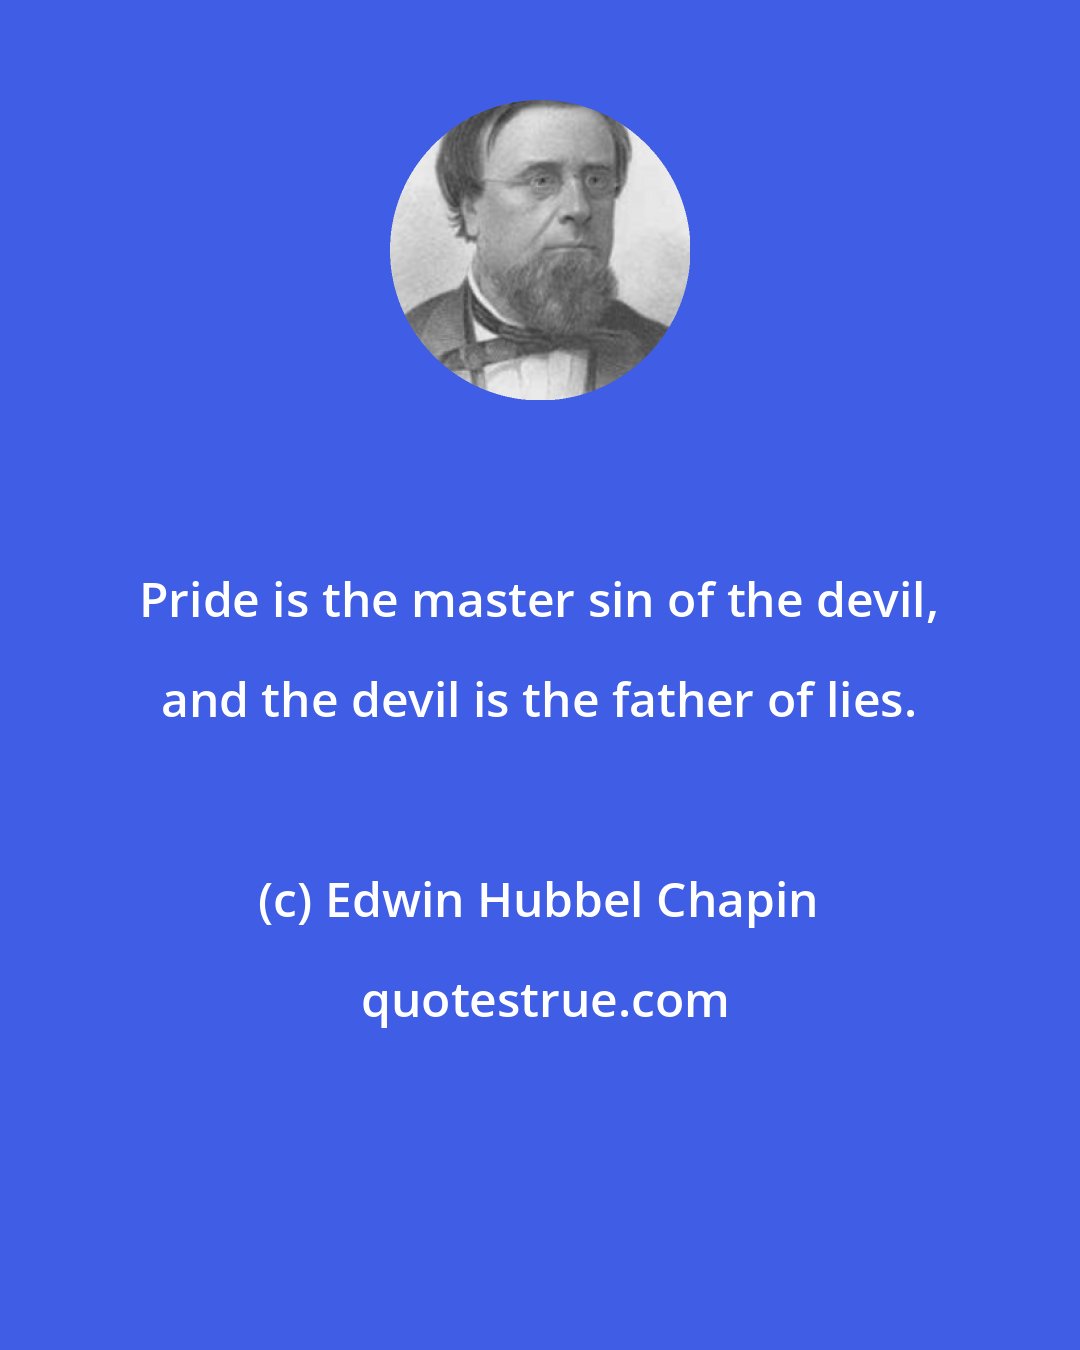 Edwin Hubbel Chapin: Pride is the master sin of the devil, and the devil is the father of lies.